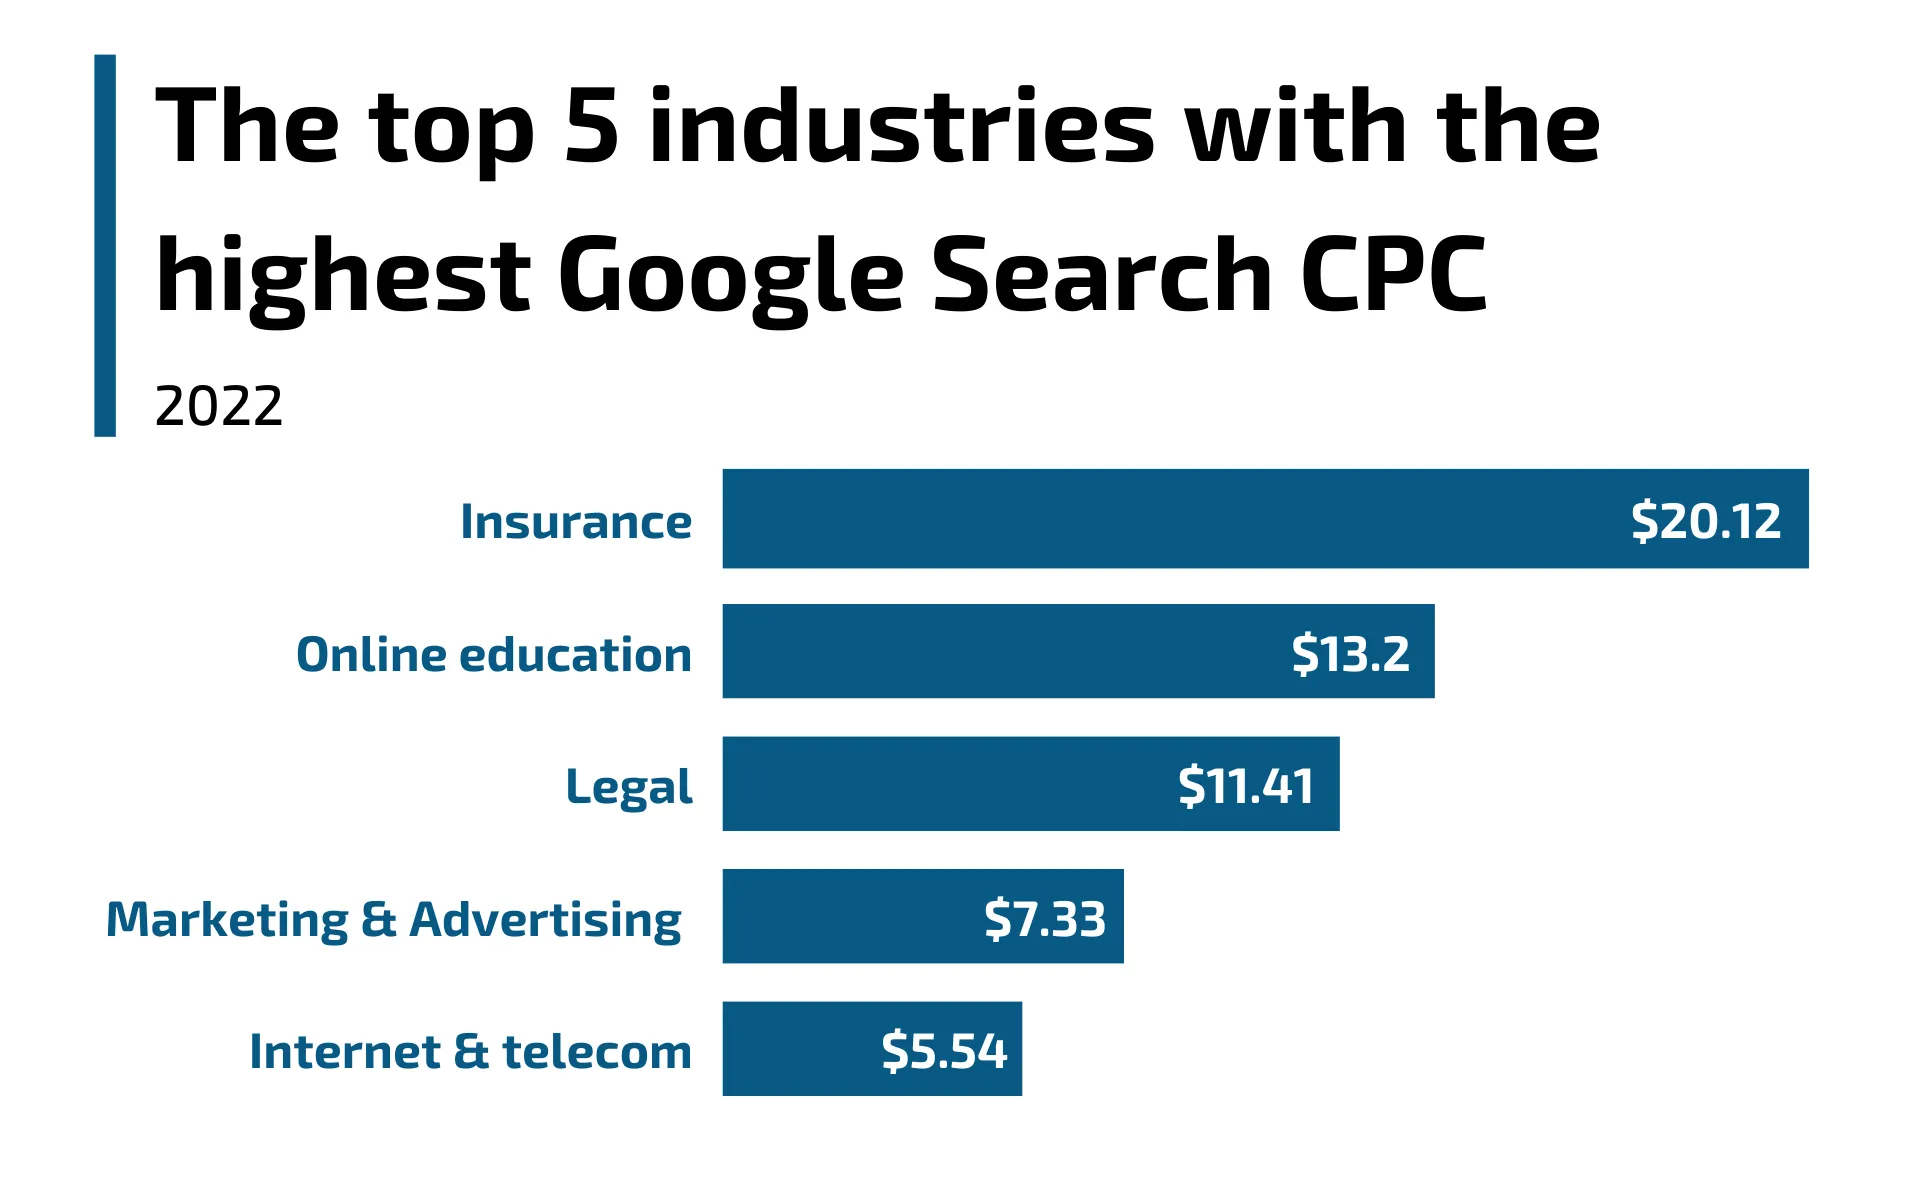 Industries with the highest Google Search CPC values